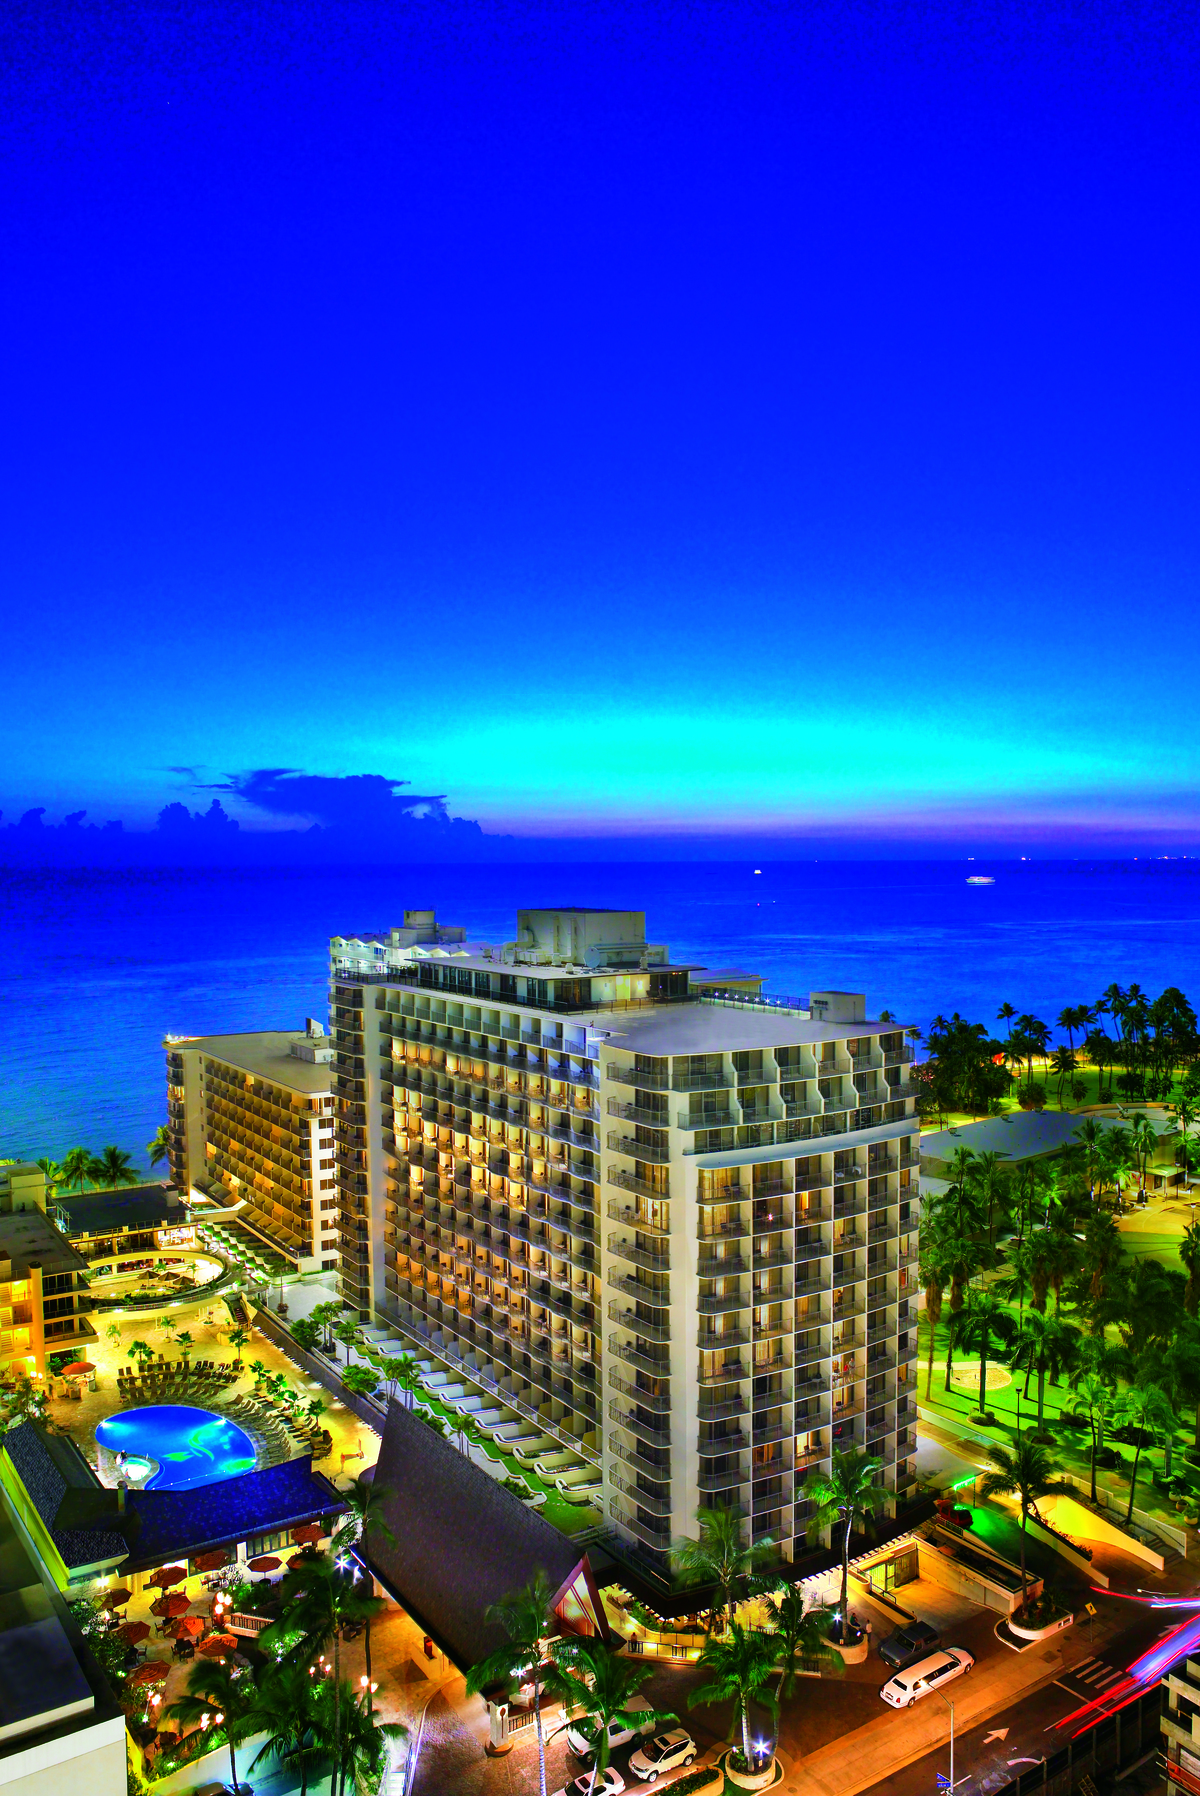 Outrigger Reef Waikiki Beach Resort – Outrigger Hotels and Resorts